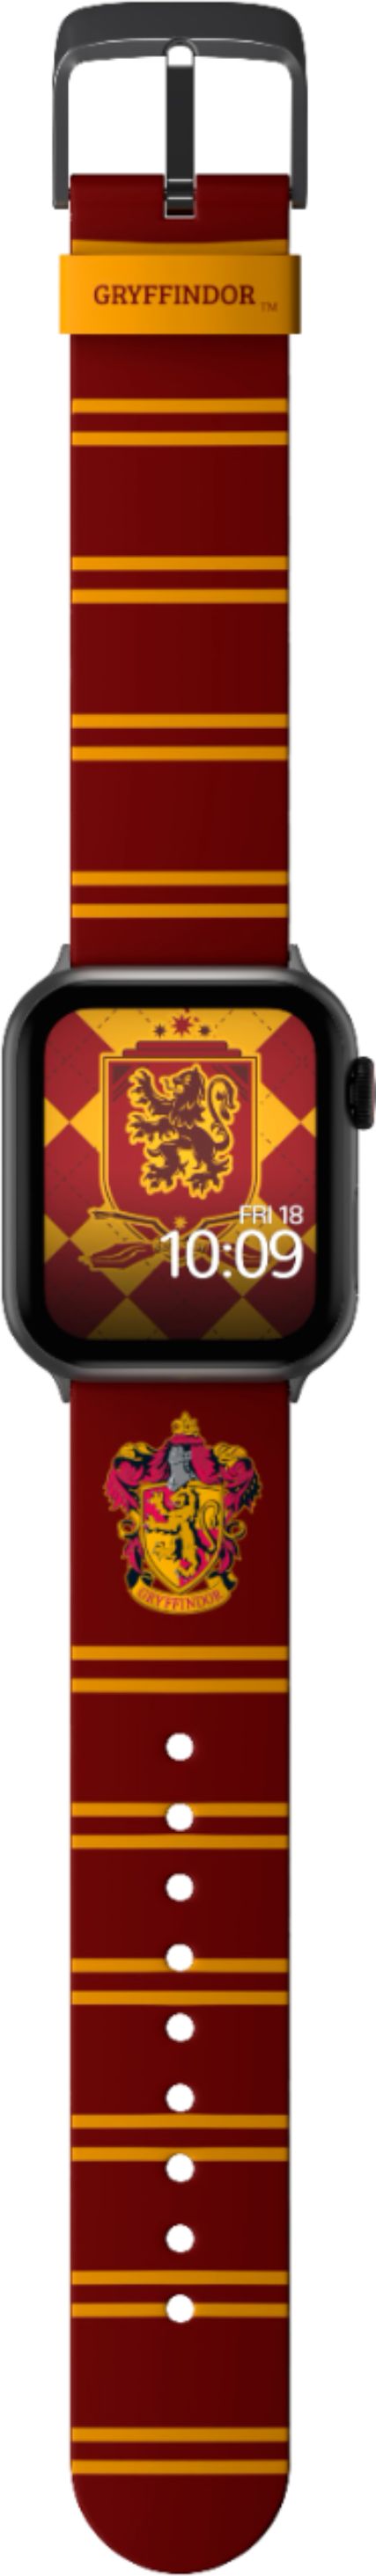 MobyFox Potter Gryffindor Smartwatch Band Compatible with Apple Watch Fits 38mm, 40mm, and 44mm ST-WNR22HPW2001 - Best Buy